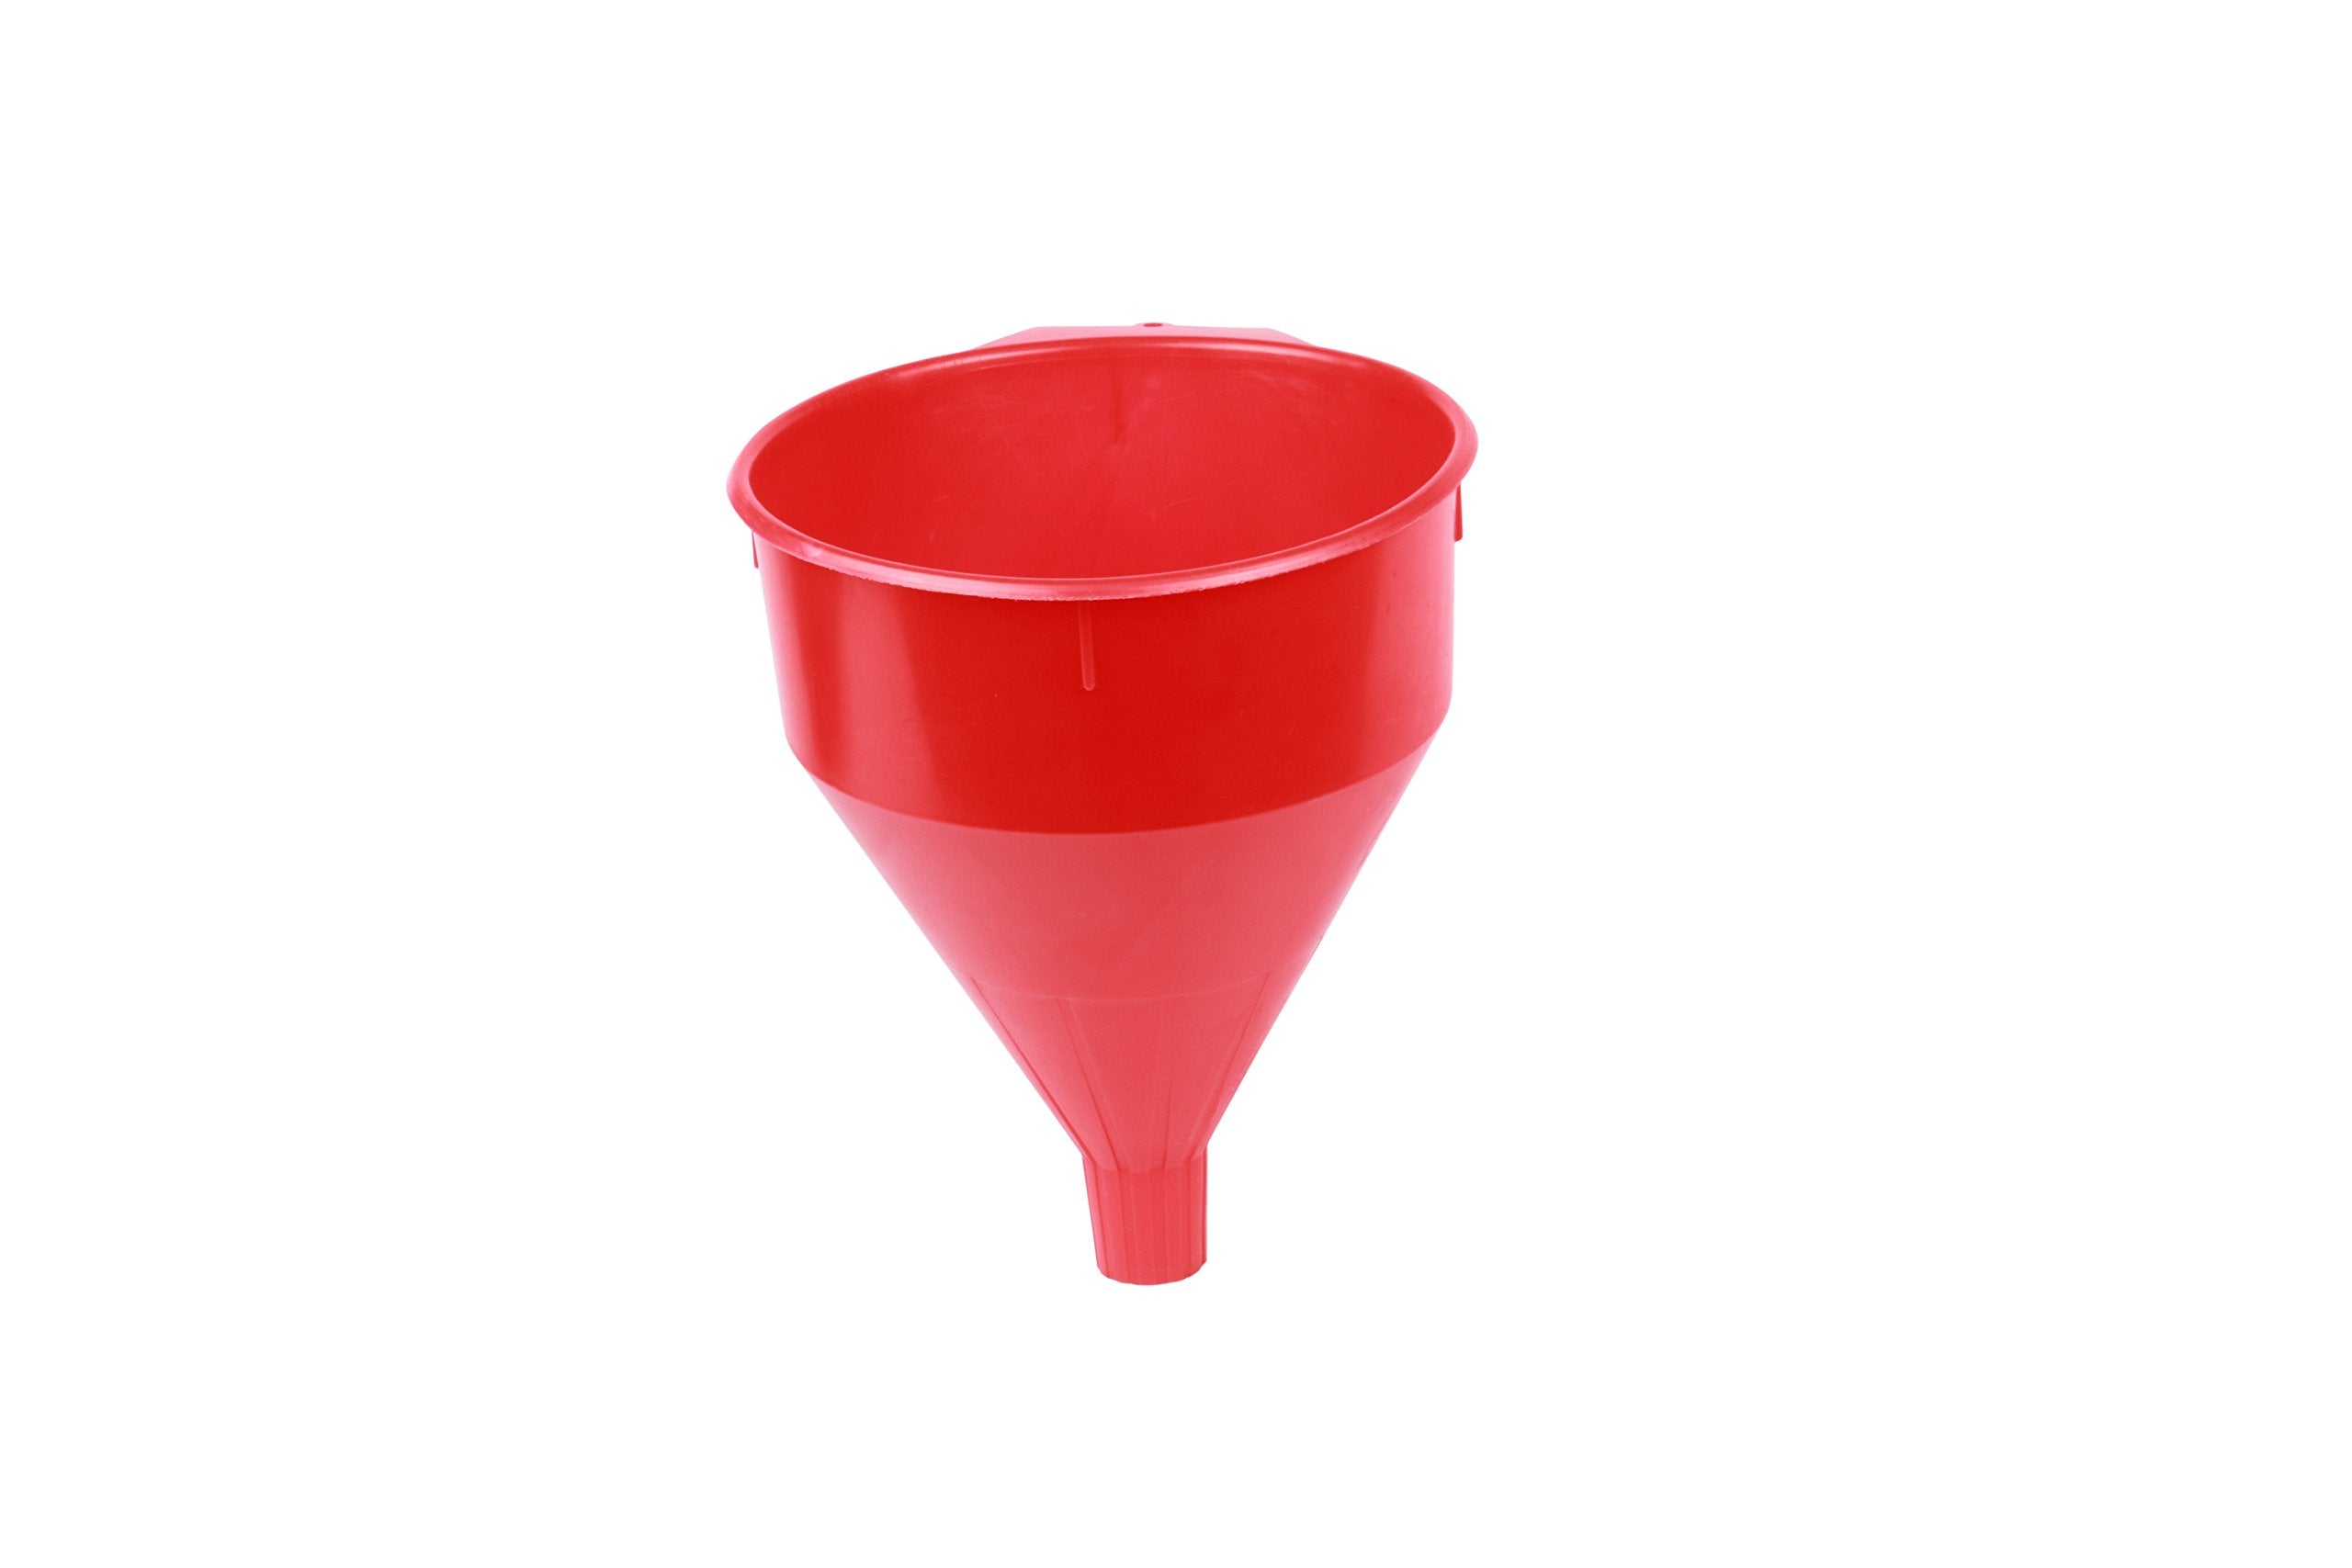 WirthCo 32006 Funnel King Red Safety Funnel with Screen - 6 Quart Capacity